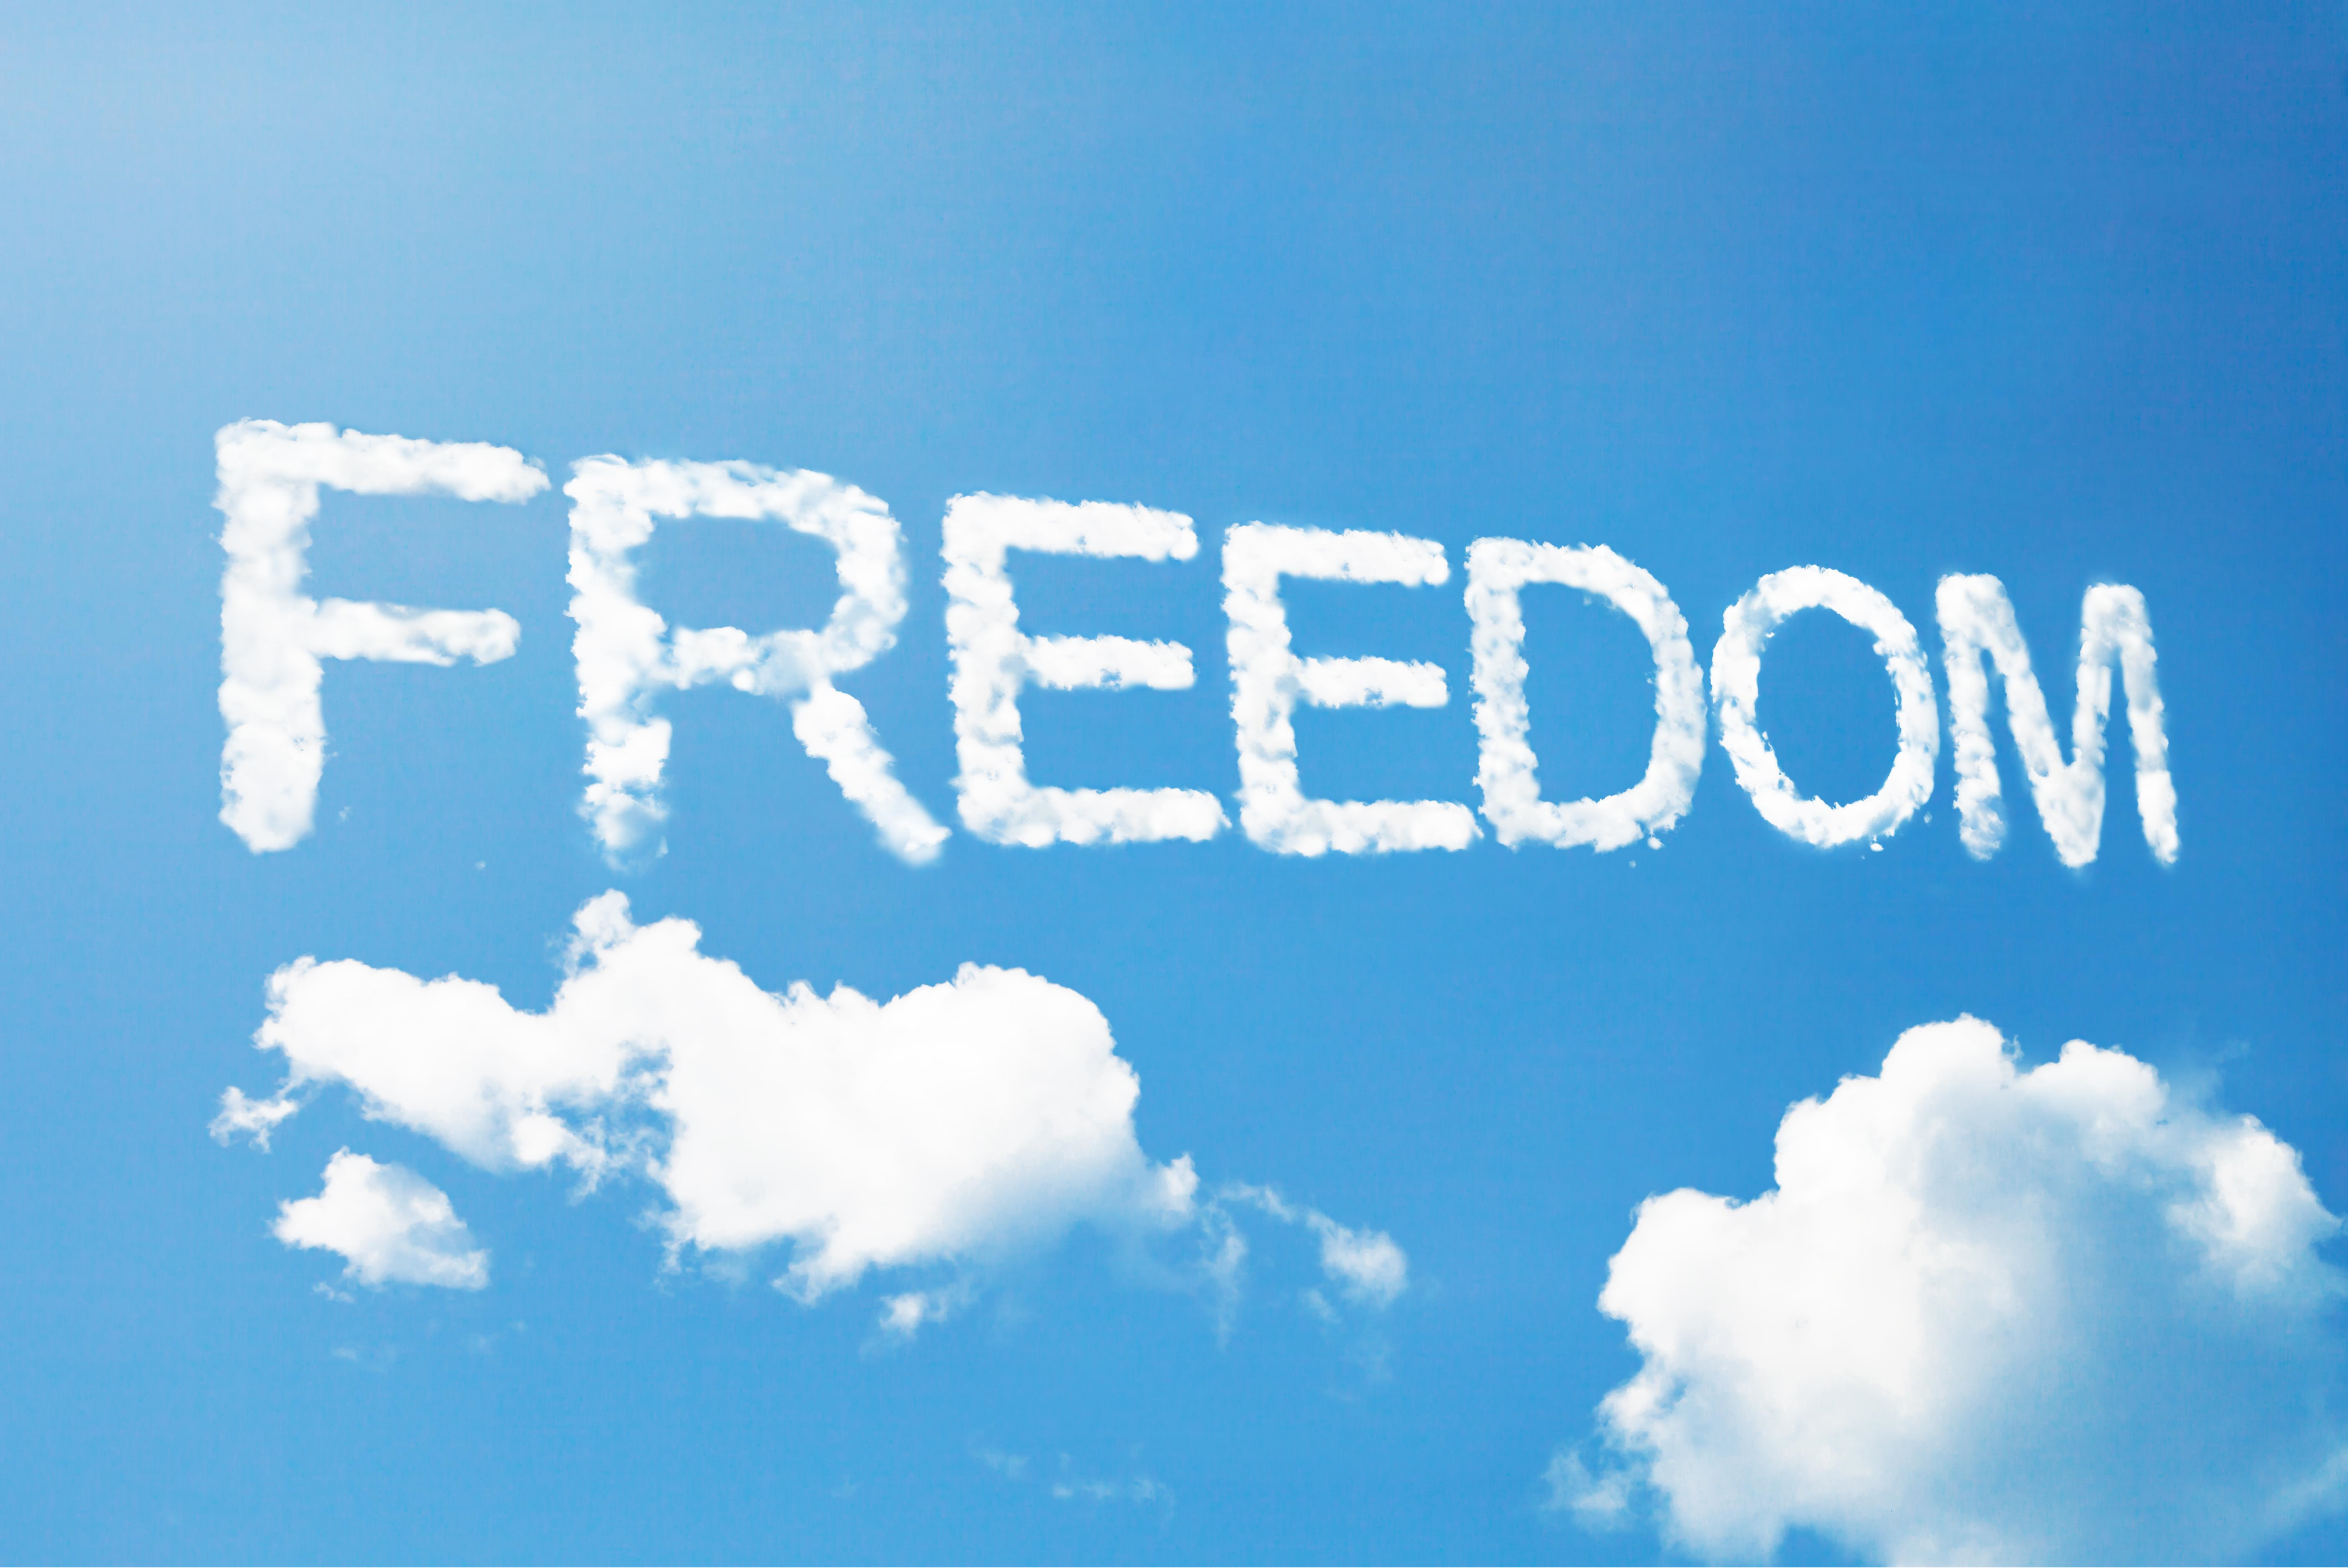 FREEDOM-IMAGE-BLUE-SKY.png (3702×2472)